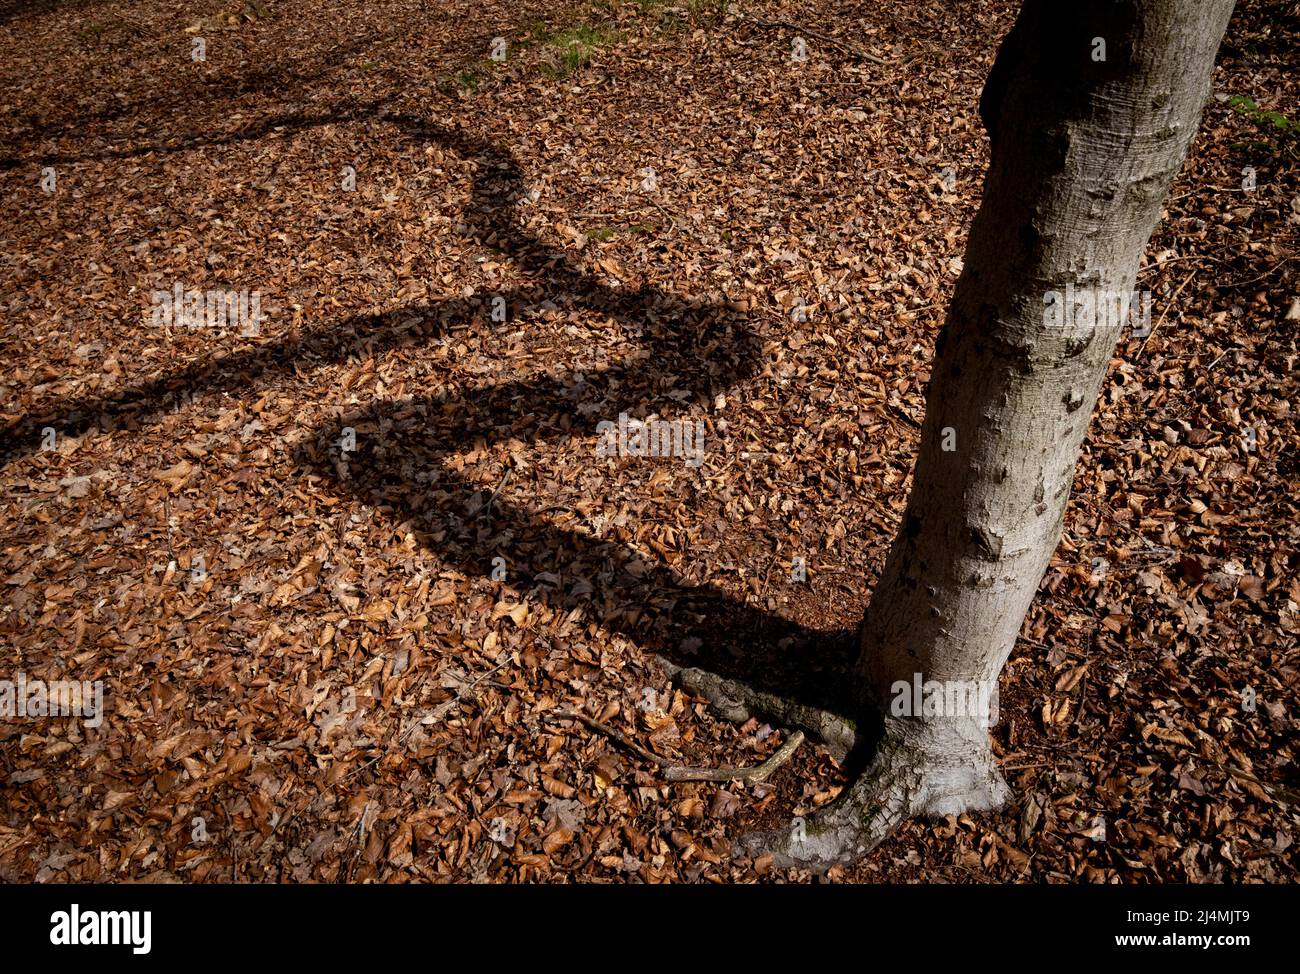 The shadow of an old bent and twisted tree falls on the ground in woodland, Worcestershire, England. Stock Photo